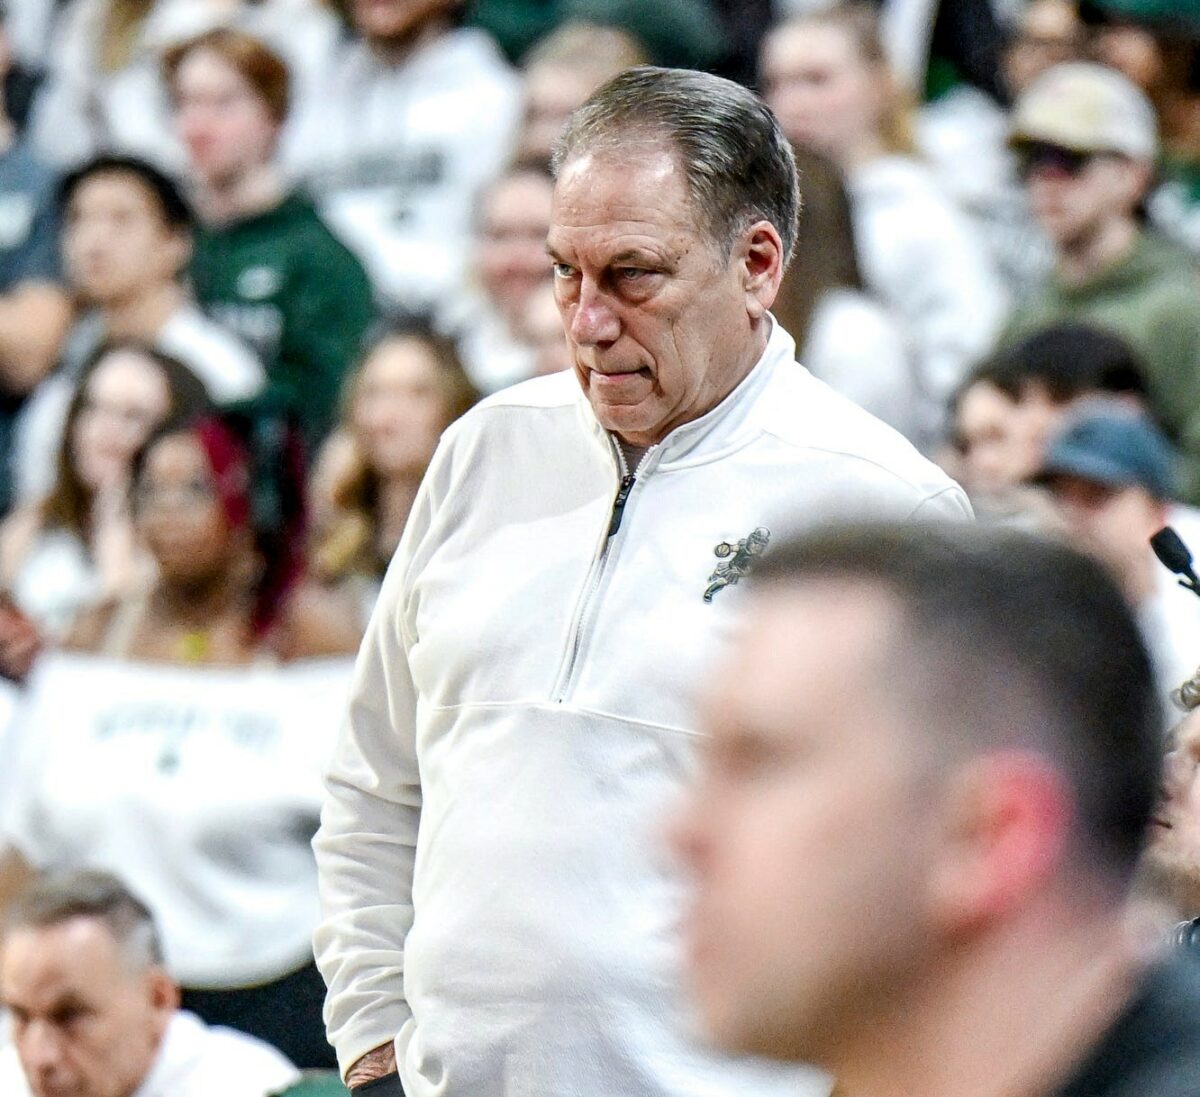 WATCH: What Michigan State head coach Tom Izzo said about Ohio State after dramatic loss